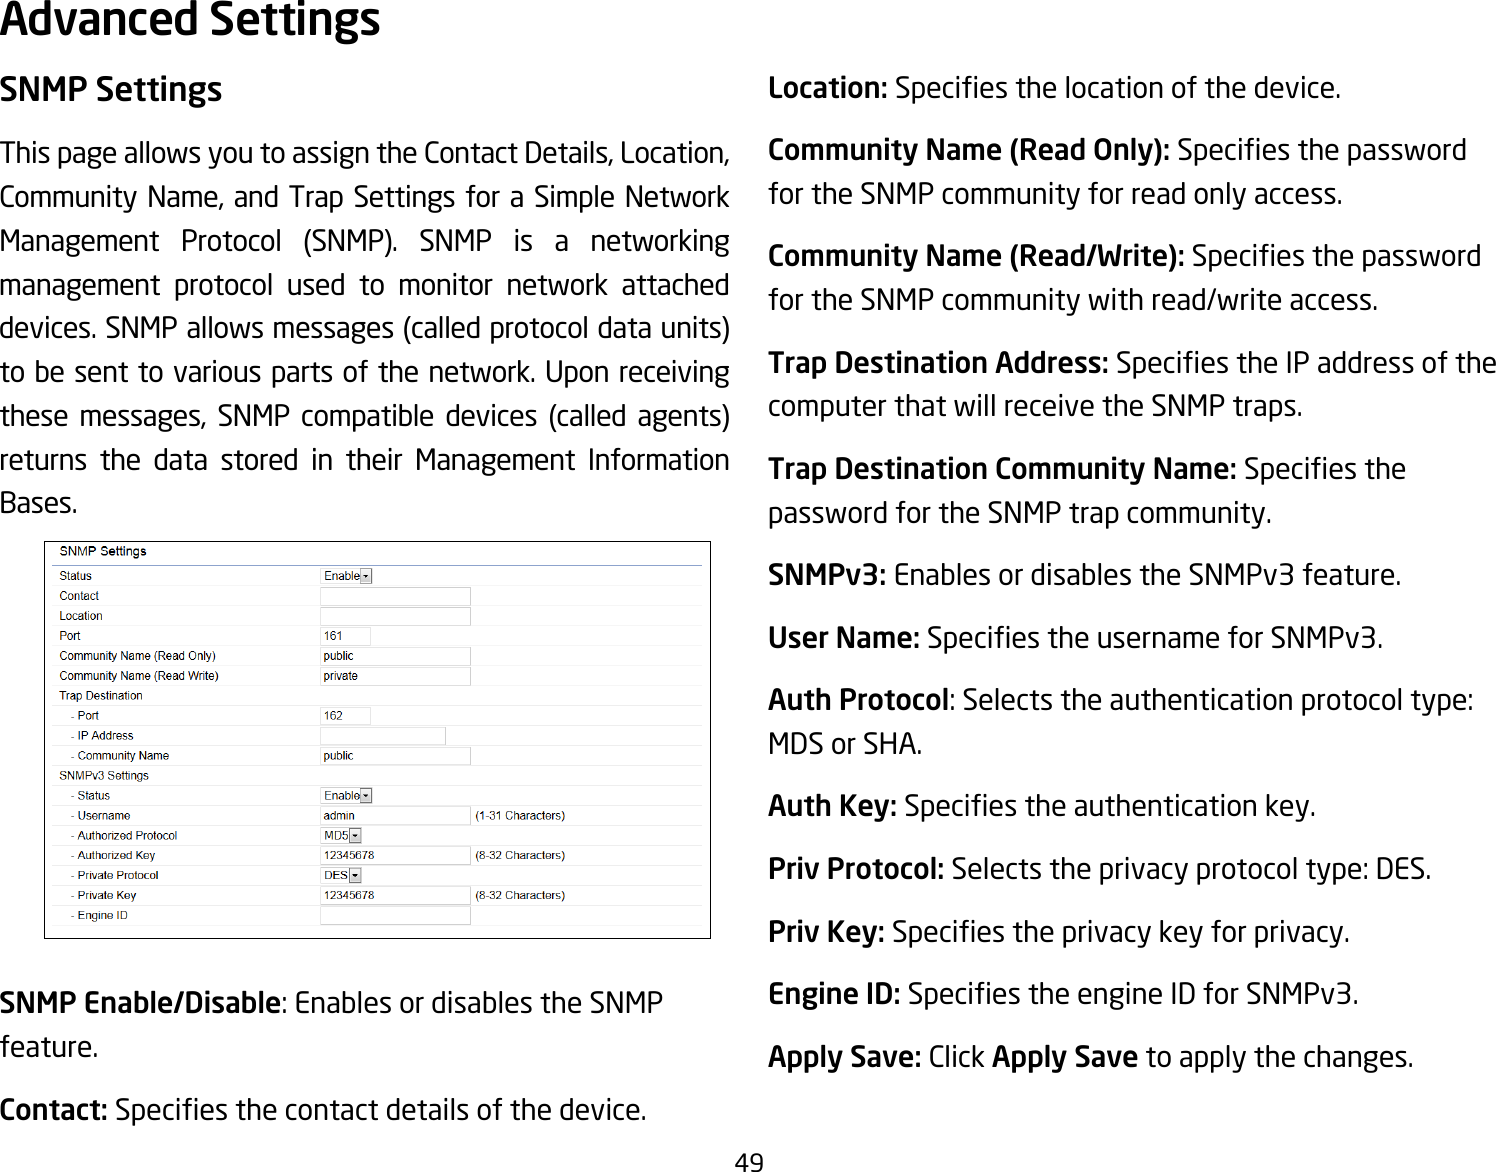 49SNMP SettingsThis page allows you to assign the Contact Details, Location, Community Name, and Trap Settings for a Simple Network Management Protocol (SNMP). SNMP is a networkingmanagement protocol used to monitor network attached devices.SNMPallowsmessages(calledprotocoldataunits)to be sent to various parts of the network. Upon receiving these messages, SNMP compatible devices (called agents)returns the data stored in their Management Information Bases.SNMP Enable/Disable: Enables or disables the SNMP feature.Contact: Speciesthecontactdetailsofthedevice.Location: Speciesthelocationofthedevice.Community Name (Read Only): Speciesthepasswordfor the SNMP community for read only access.Community Name (Read/Write):Speciesthepasswordfor the SNMP community with read/write access.Trap Destination Address:SpeciestheIPaddressofthecomputer that will receive the SNMP traps.Trap Destination Community Name: Speciesthepassword for the SNMP trap community.SNMPv3: Enables or disables the SNMPv3 feature.User Name:SpeciestheusernameforSNMPv3.Auth Protocol: Selects the authentication protocol type: MDS or SHA.Auth Key: Speciestheauthenticationkey.Priv Protocol: Selects the privacy protocol type: DES.Priv Key: Speciestheprivacykeyforprivacy.Engine ID: SpeciestheengineIDforSNMPv3.Apply Save: Click Apply Save to apply the changes.Advanced Settings